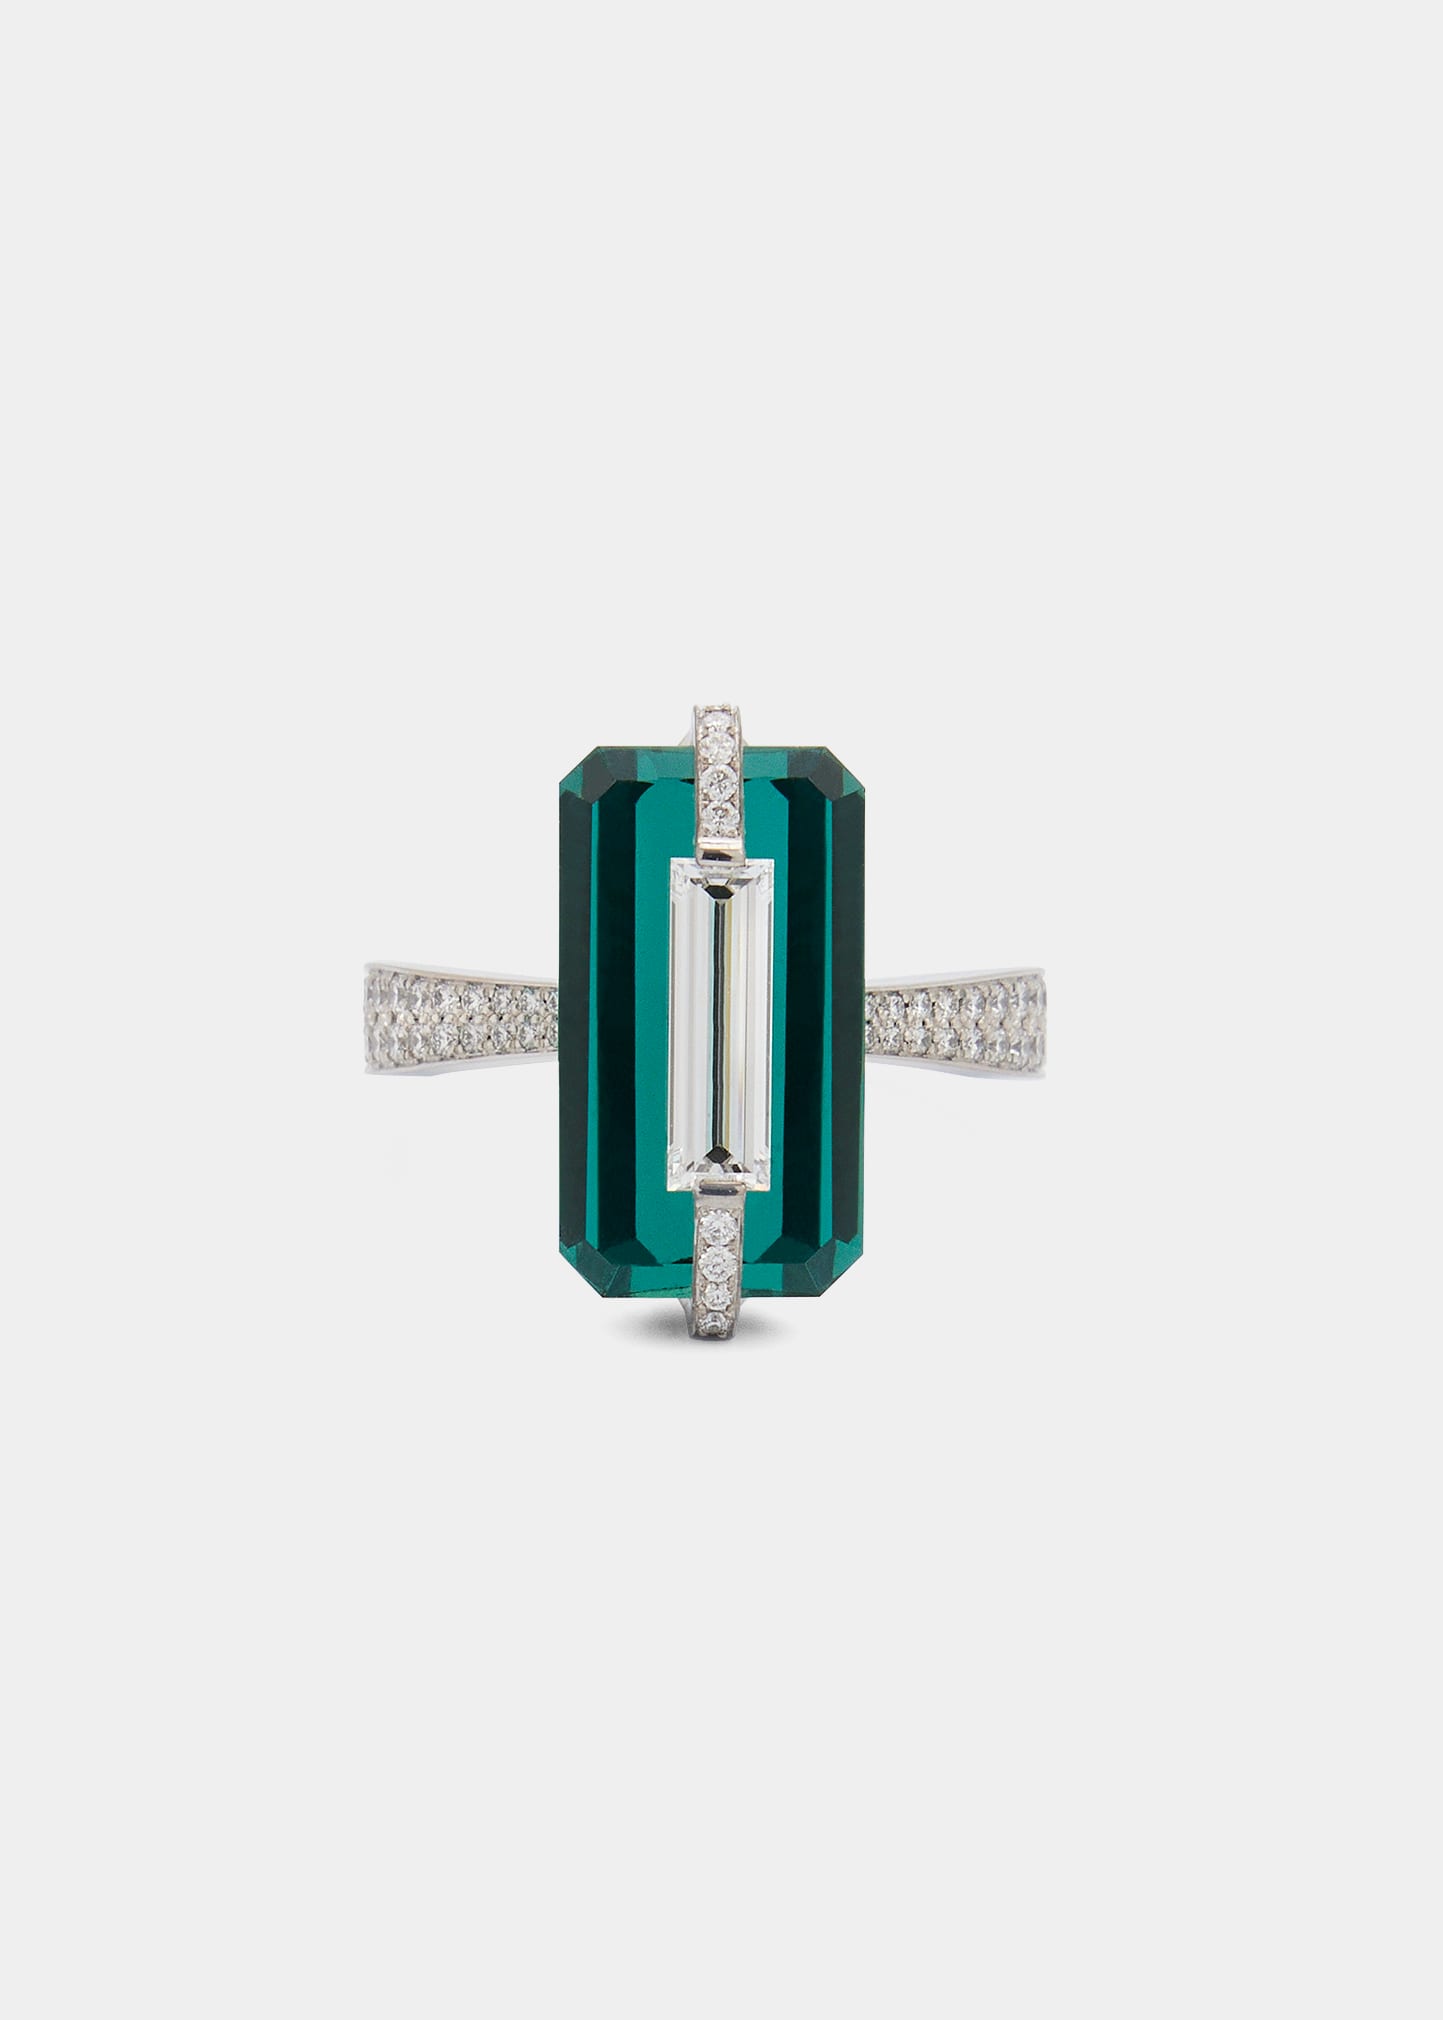 18K White Gold Ring with Diamonds and Tourmaline